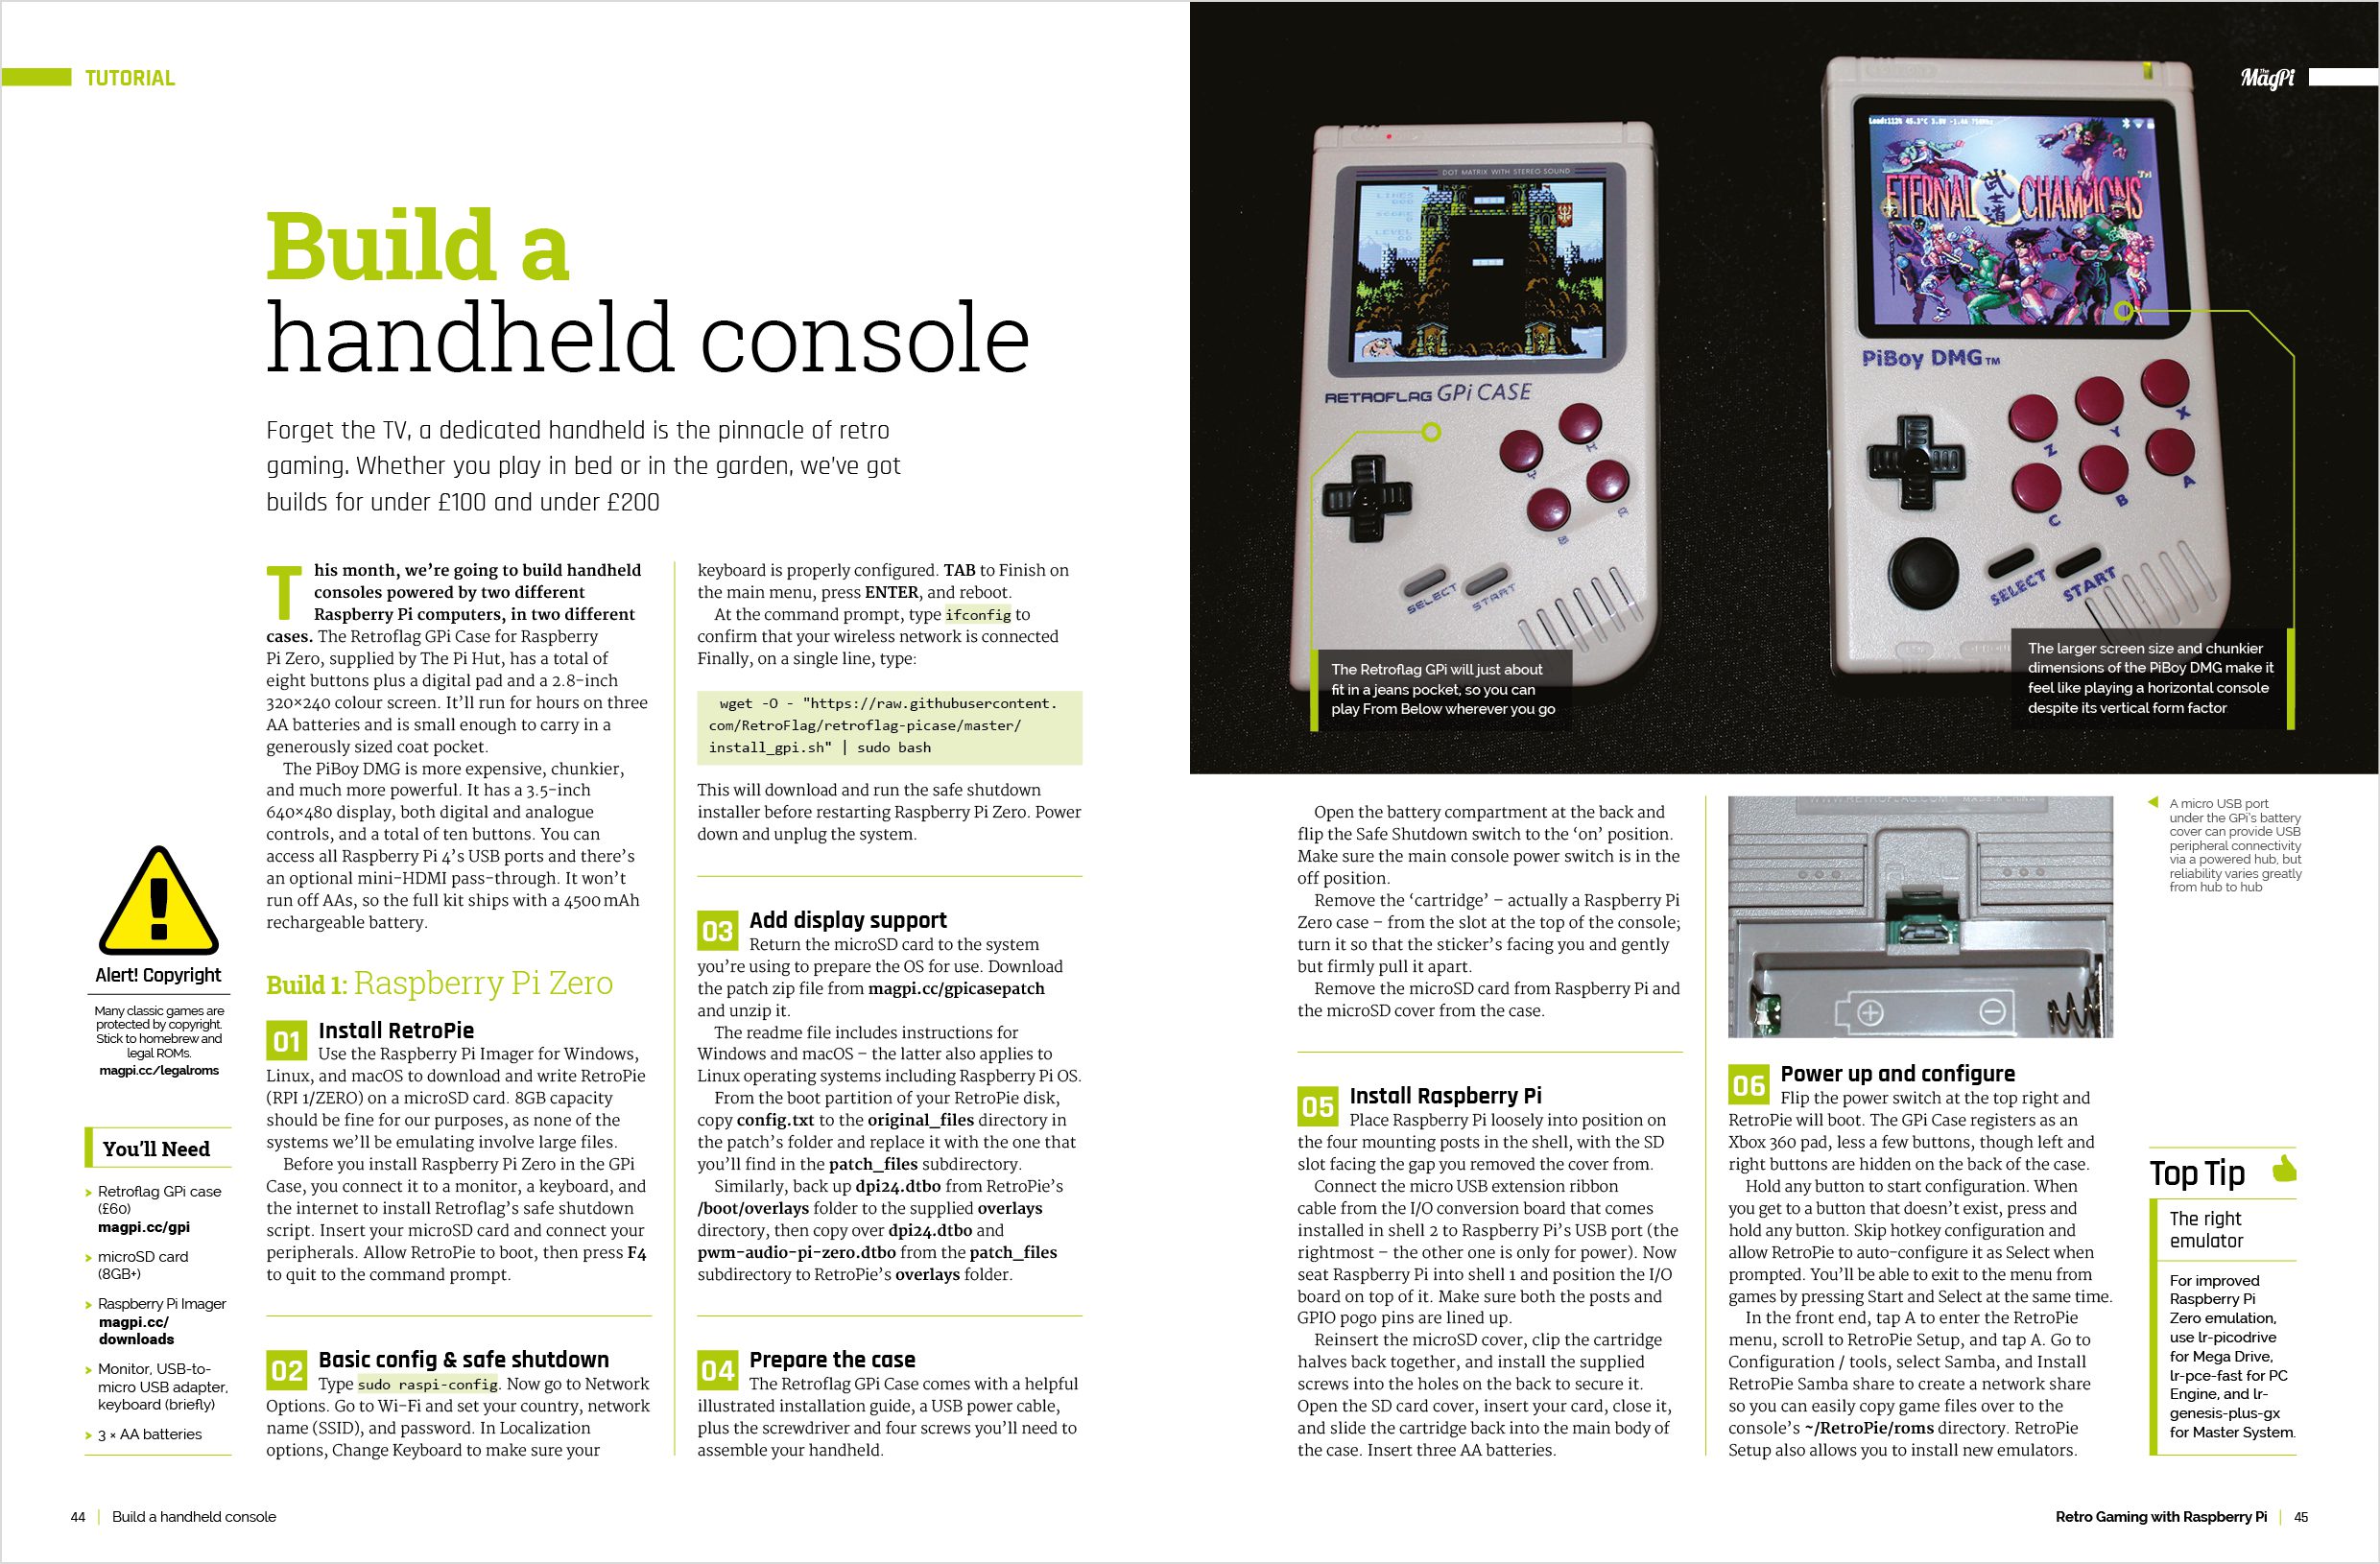 Build a handheld console with Raspberry Pi